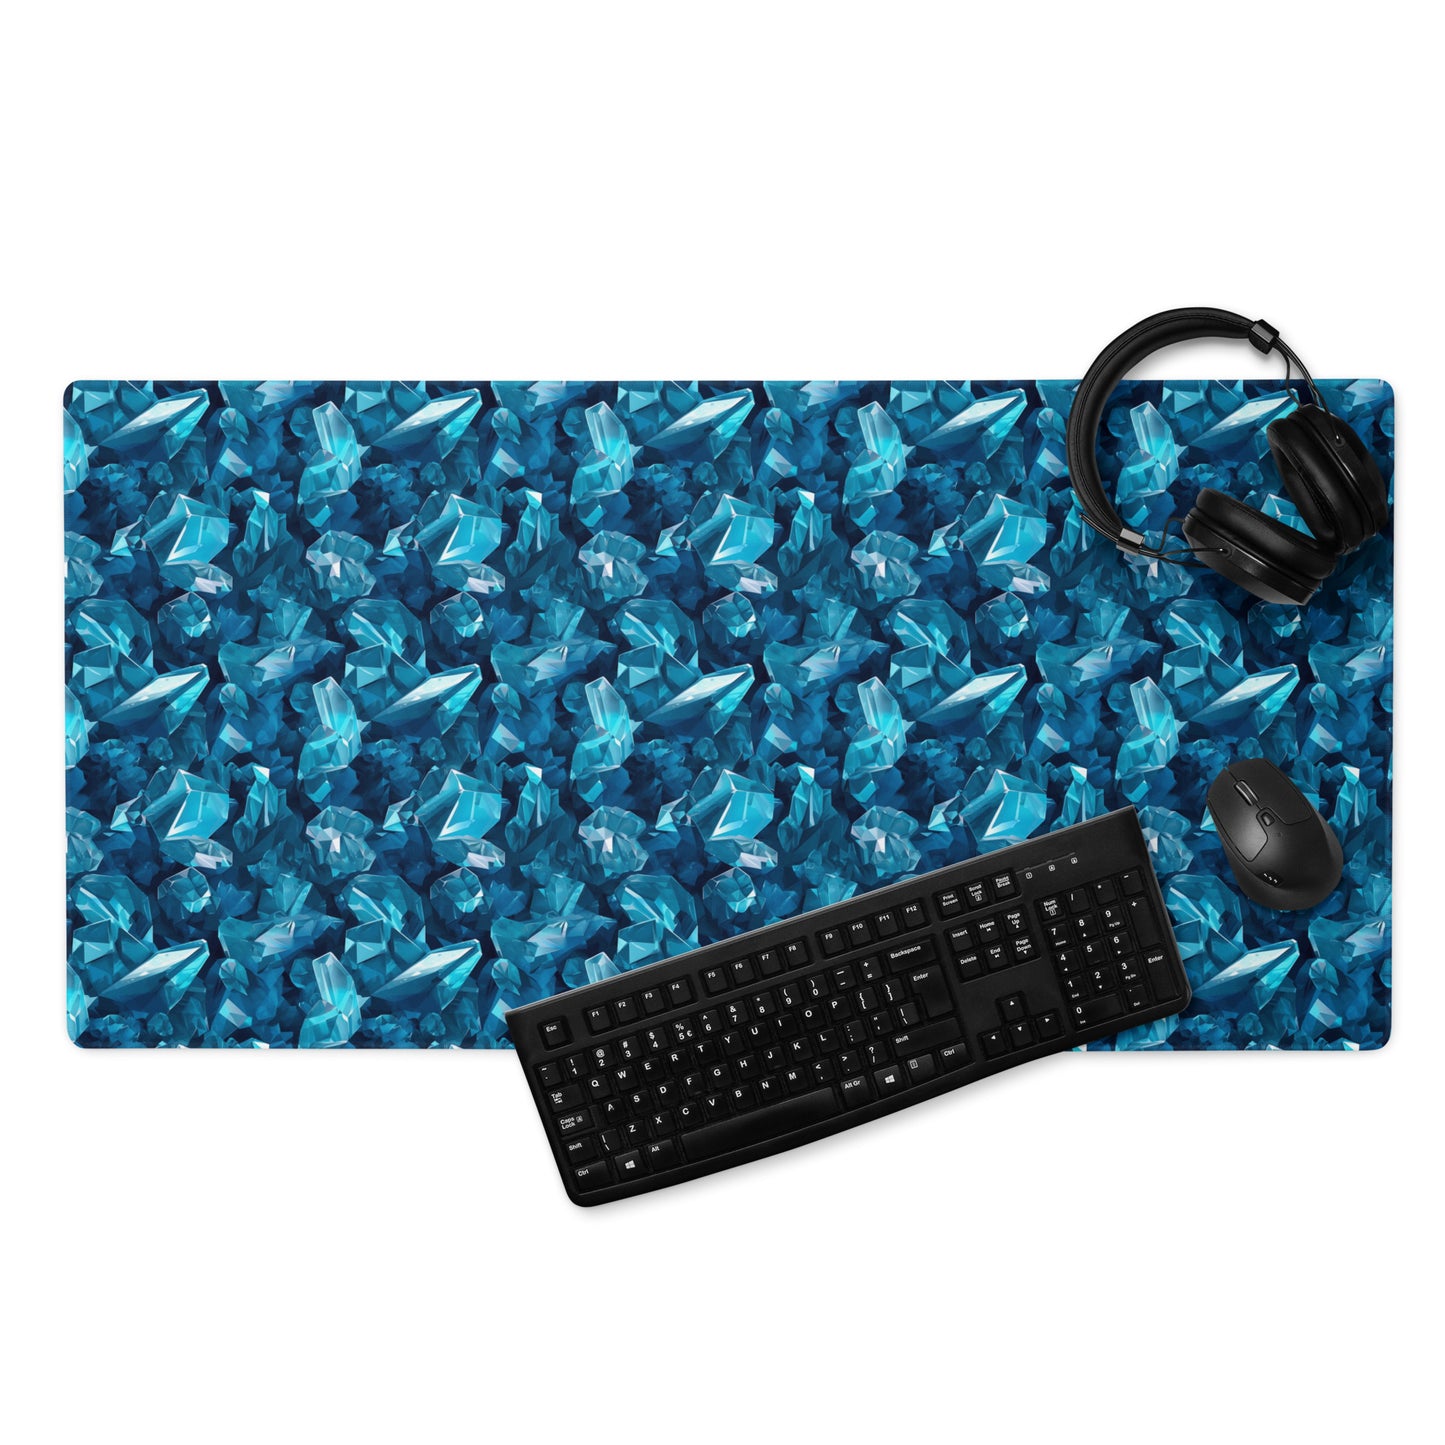 A 36" x 18" gaming desk pad with blue crystals. A keyboard, mouse, and headphones sit on it.